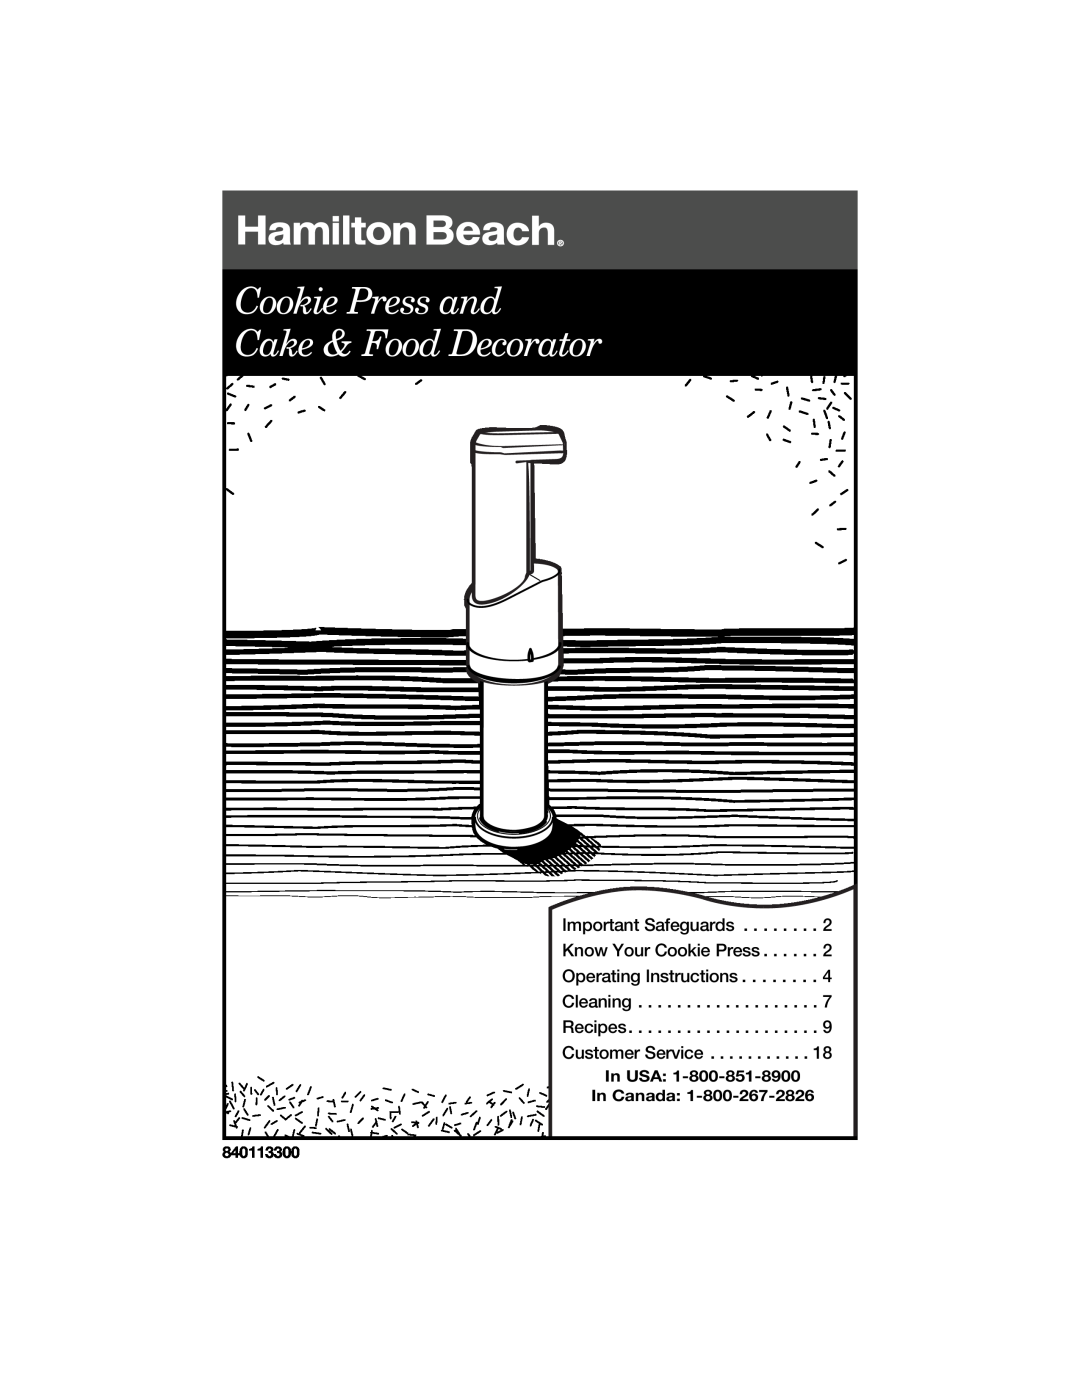 Hamilton Beach Cookie Press and Cake & Food Decorator manual Important Safeguards, Know Your Cookie Press, Cleaning 